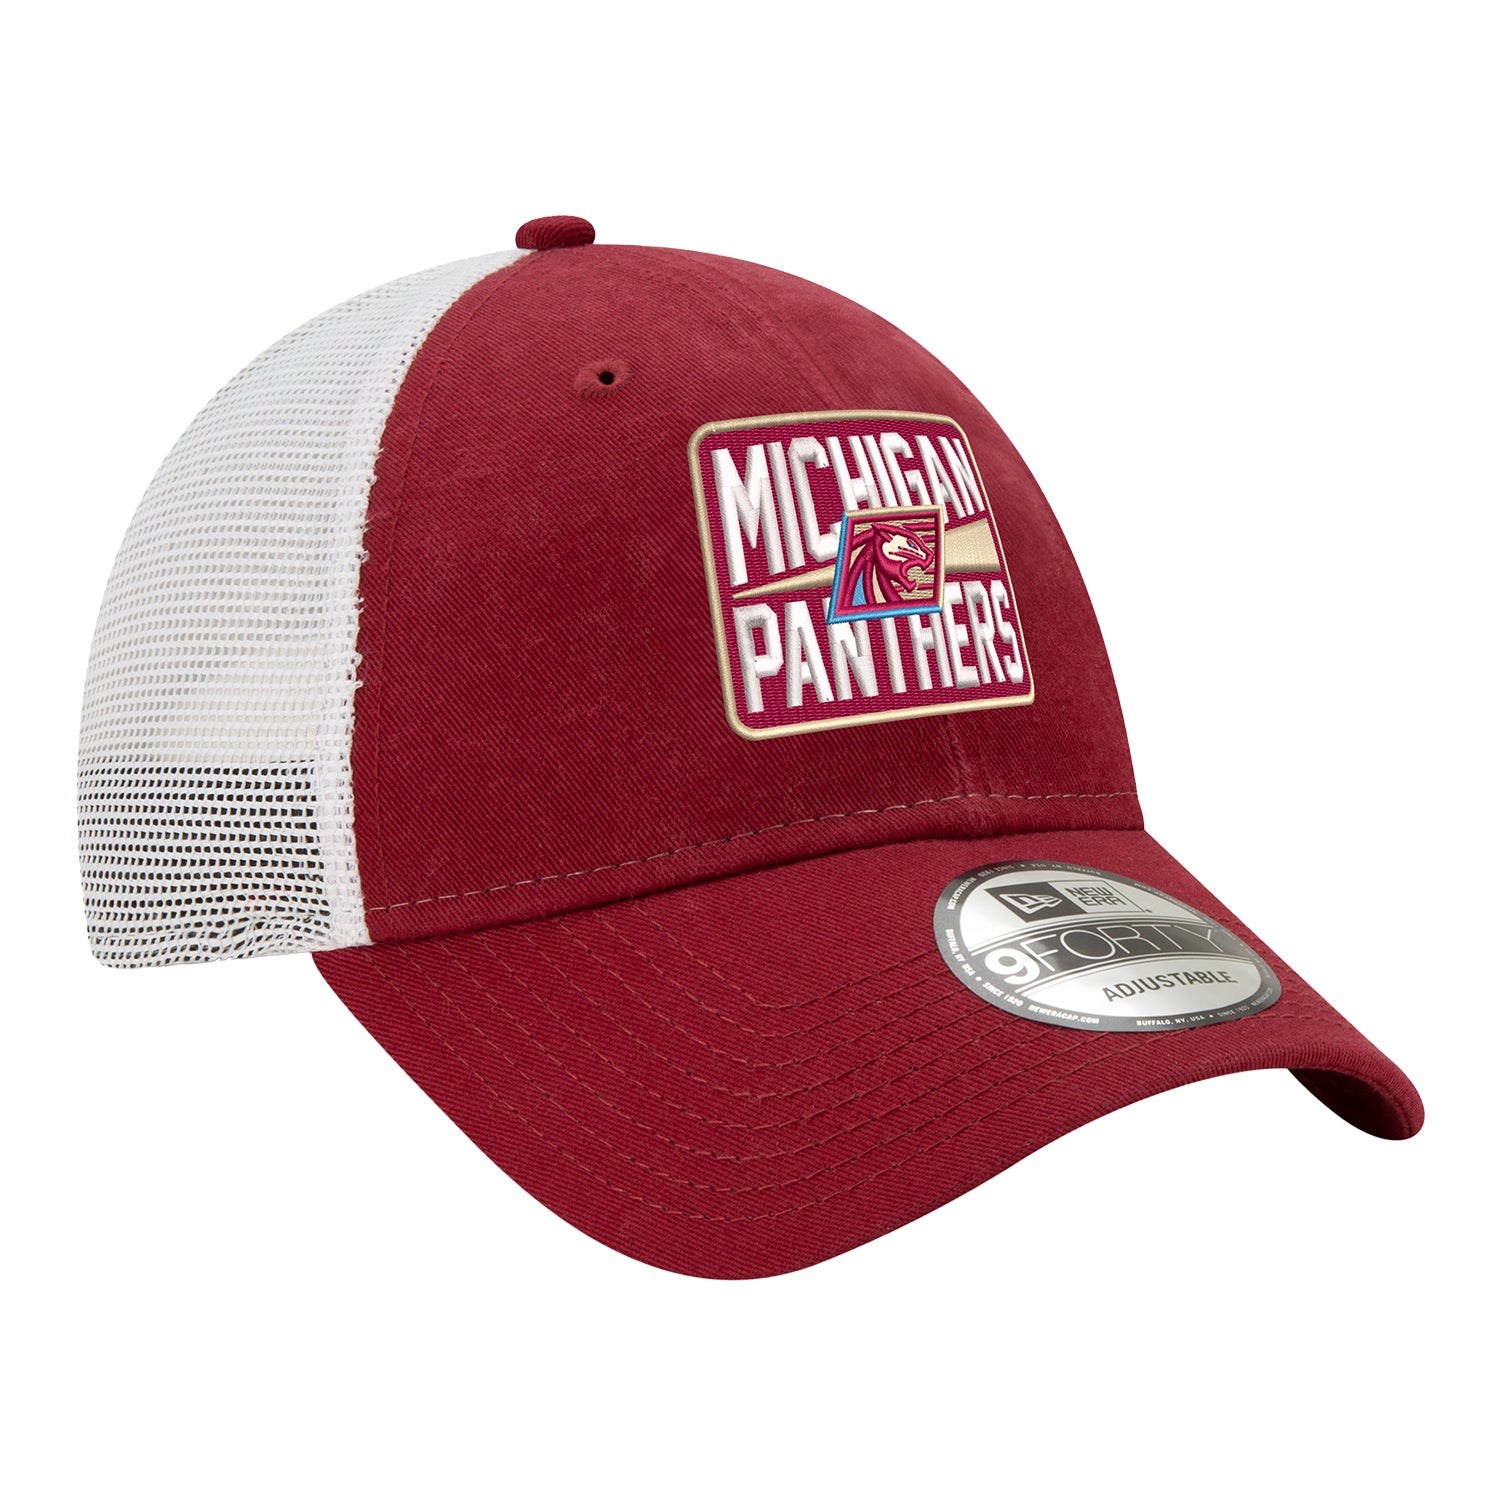 New Era 9TWENTY Michigan Panthers Trucker Meshback Hat In Red - Front Right View